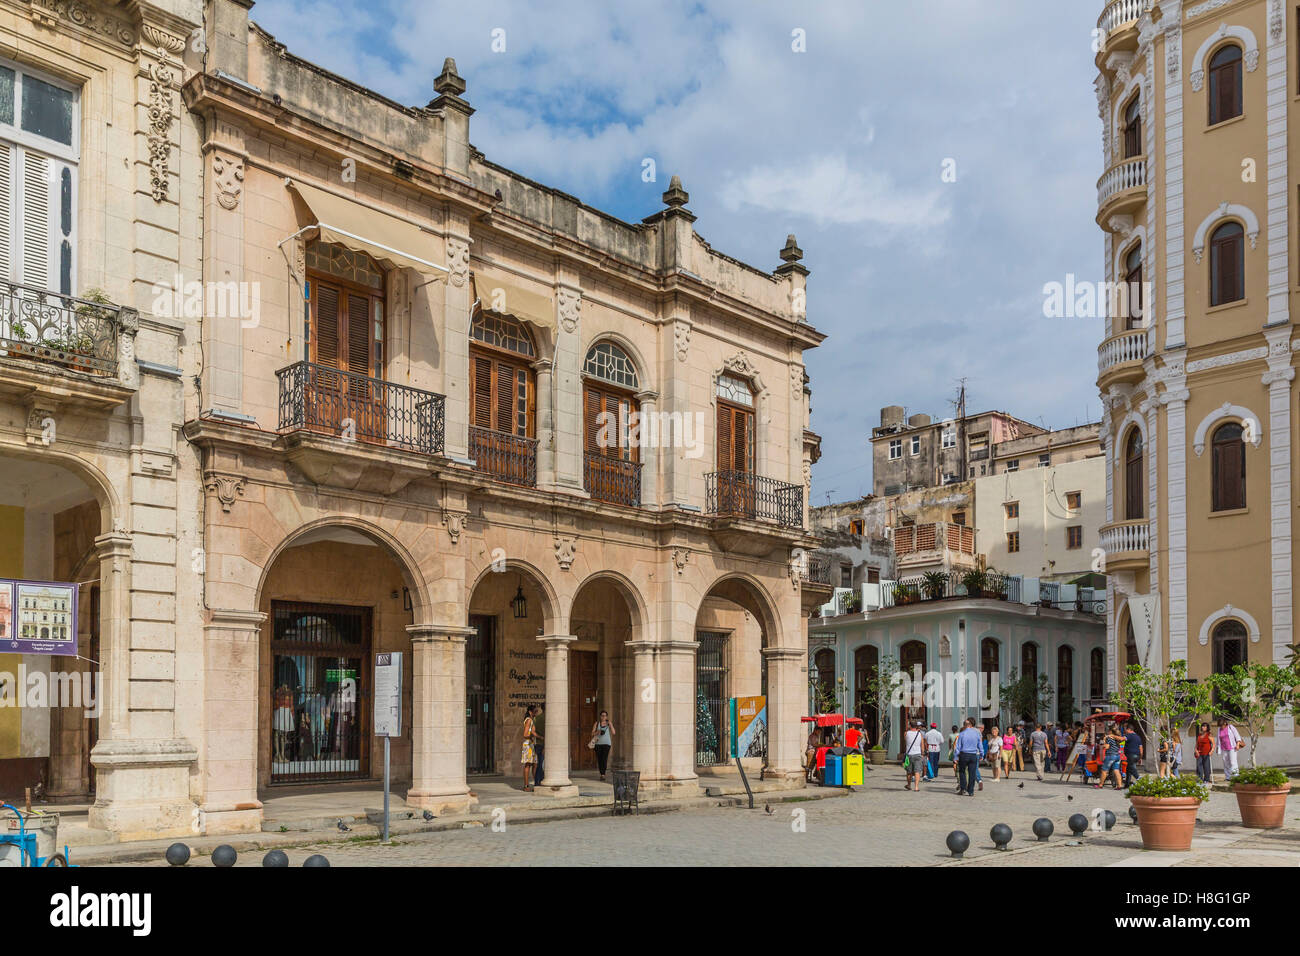 Restored colonial building and town palaces in the centre of Havana, behind cafe of Taberna, performance bar of Buena Vista Social Club, Plaza Vieja, Havana, La Habana, Cuba, Republic of Cuba, the Greater Antilles, the Caribbean Stock Photo